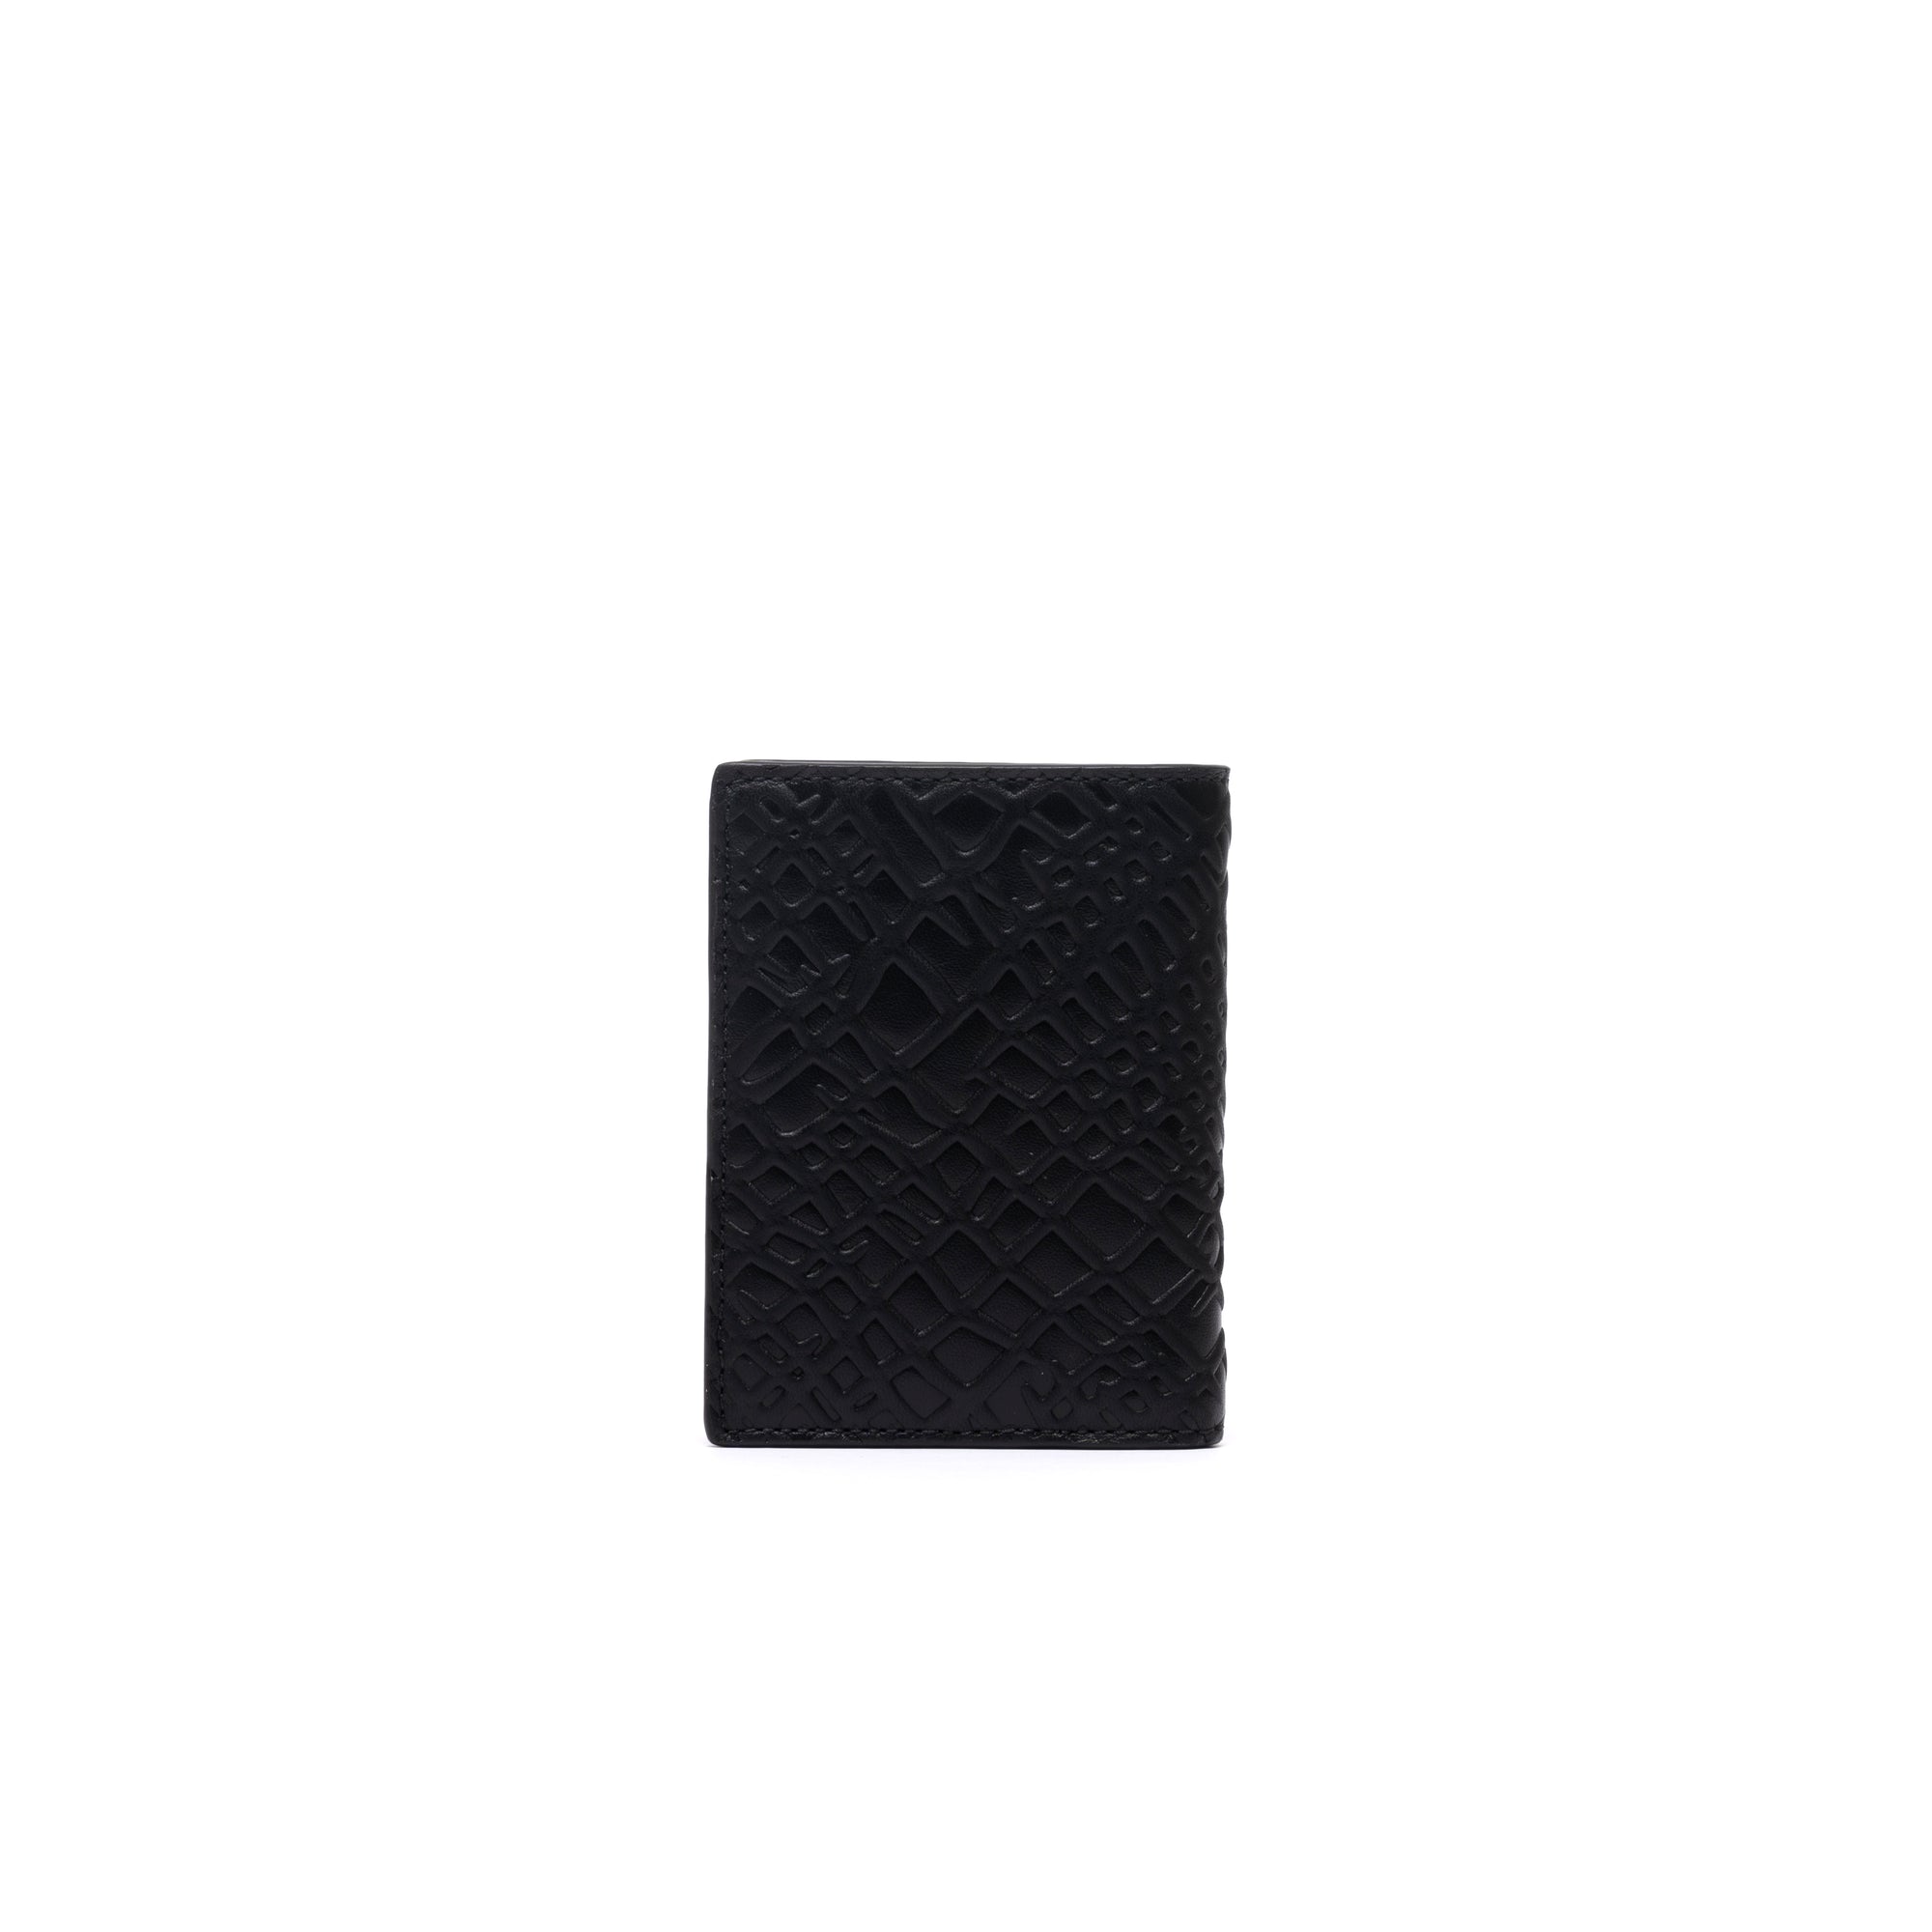 CDG WALLET - Embossed Roots (SA0641ER Black) view 2